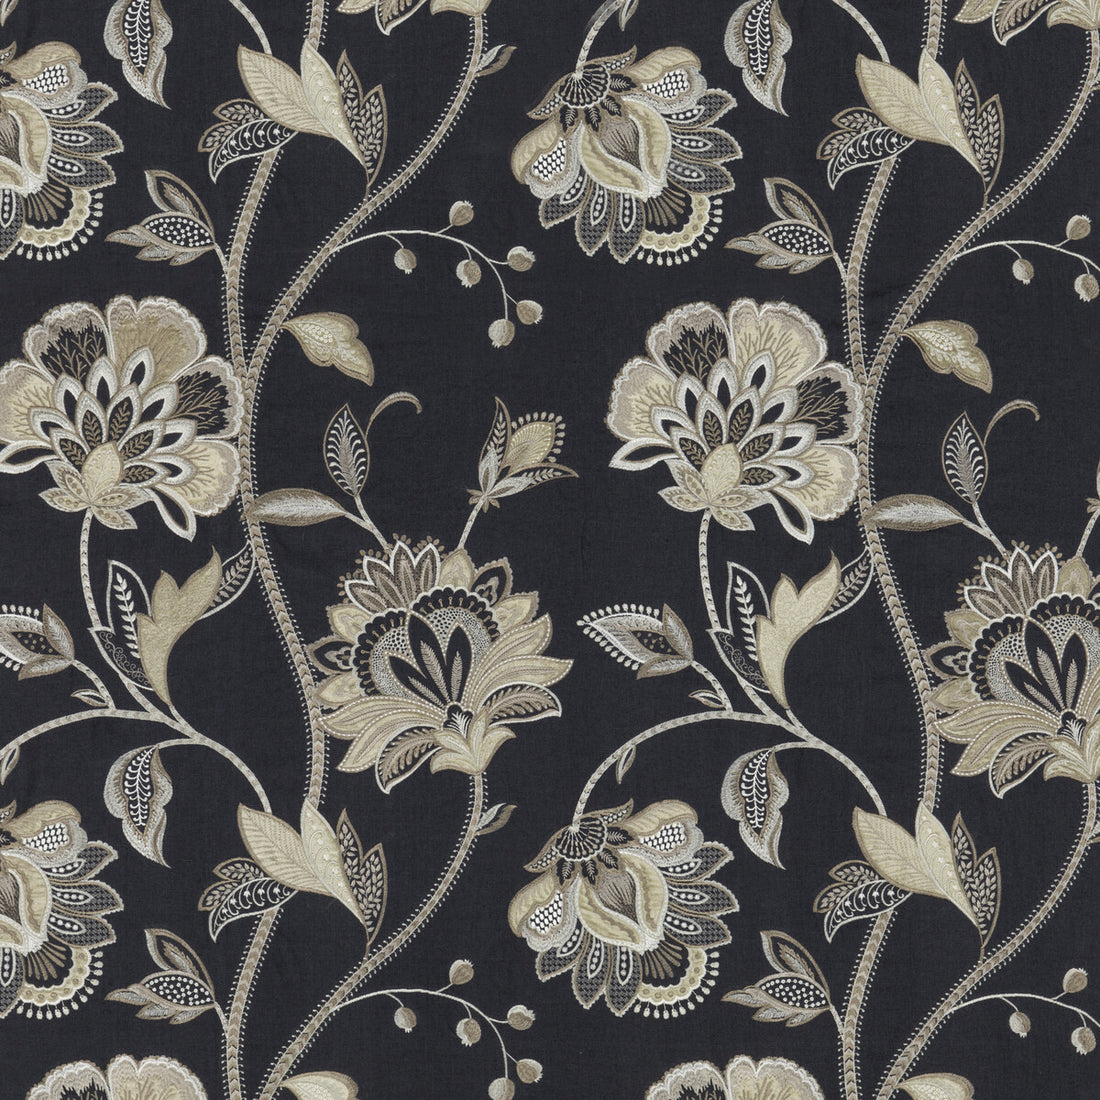 Ormesby fabric in indigo color - pattern BF10762.2.0 - by G P &amp; J Baker in the Keswick Embroideries collection